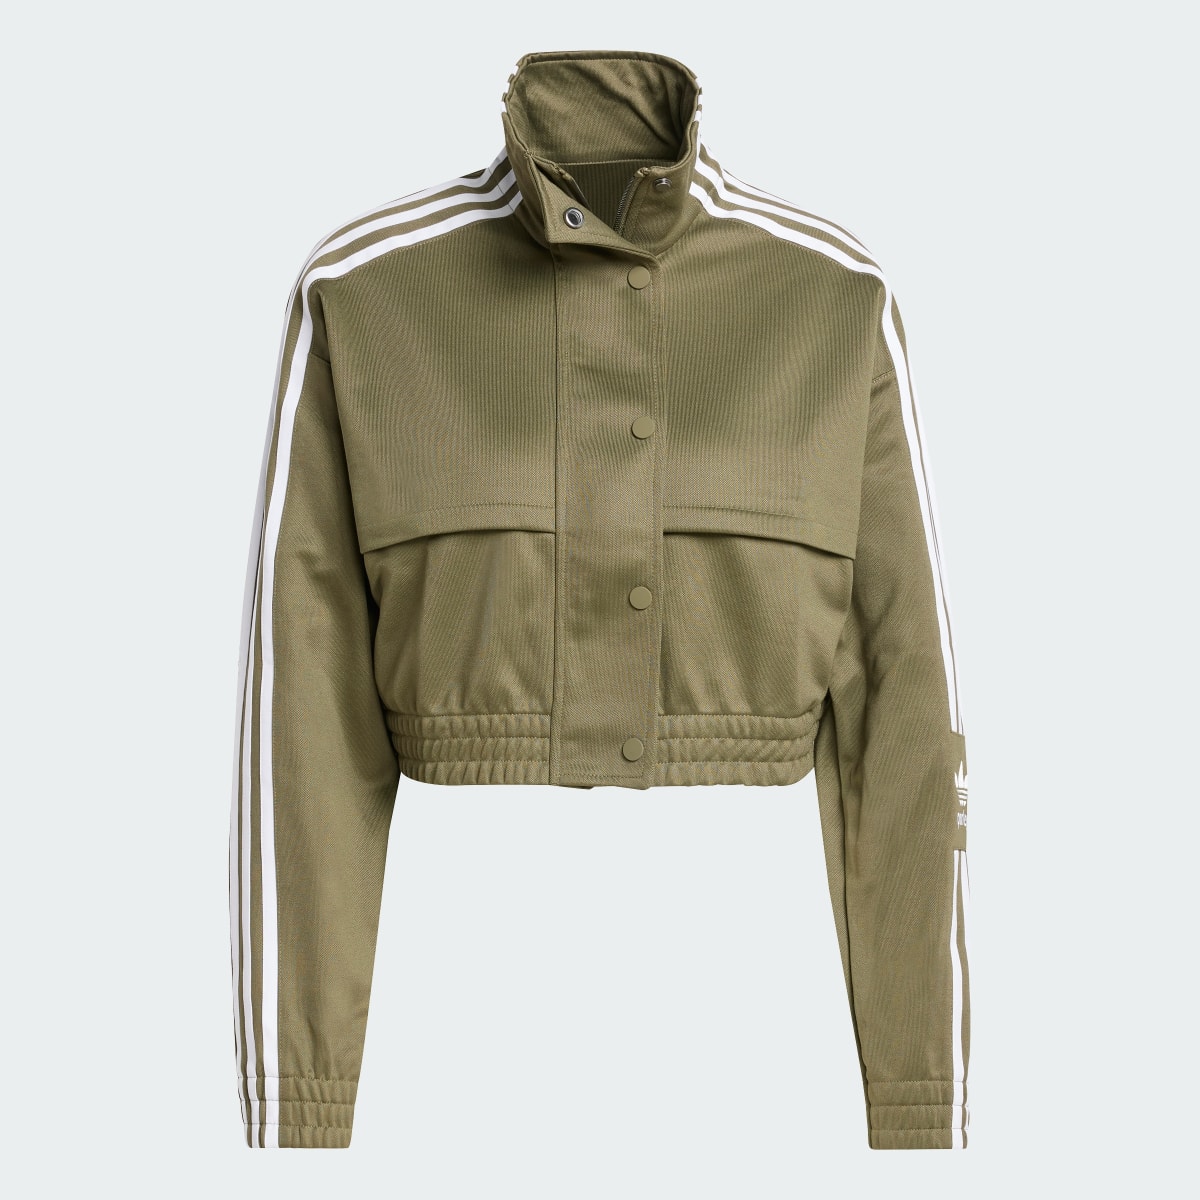 Adidas Parley Track Top. 5